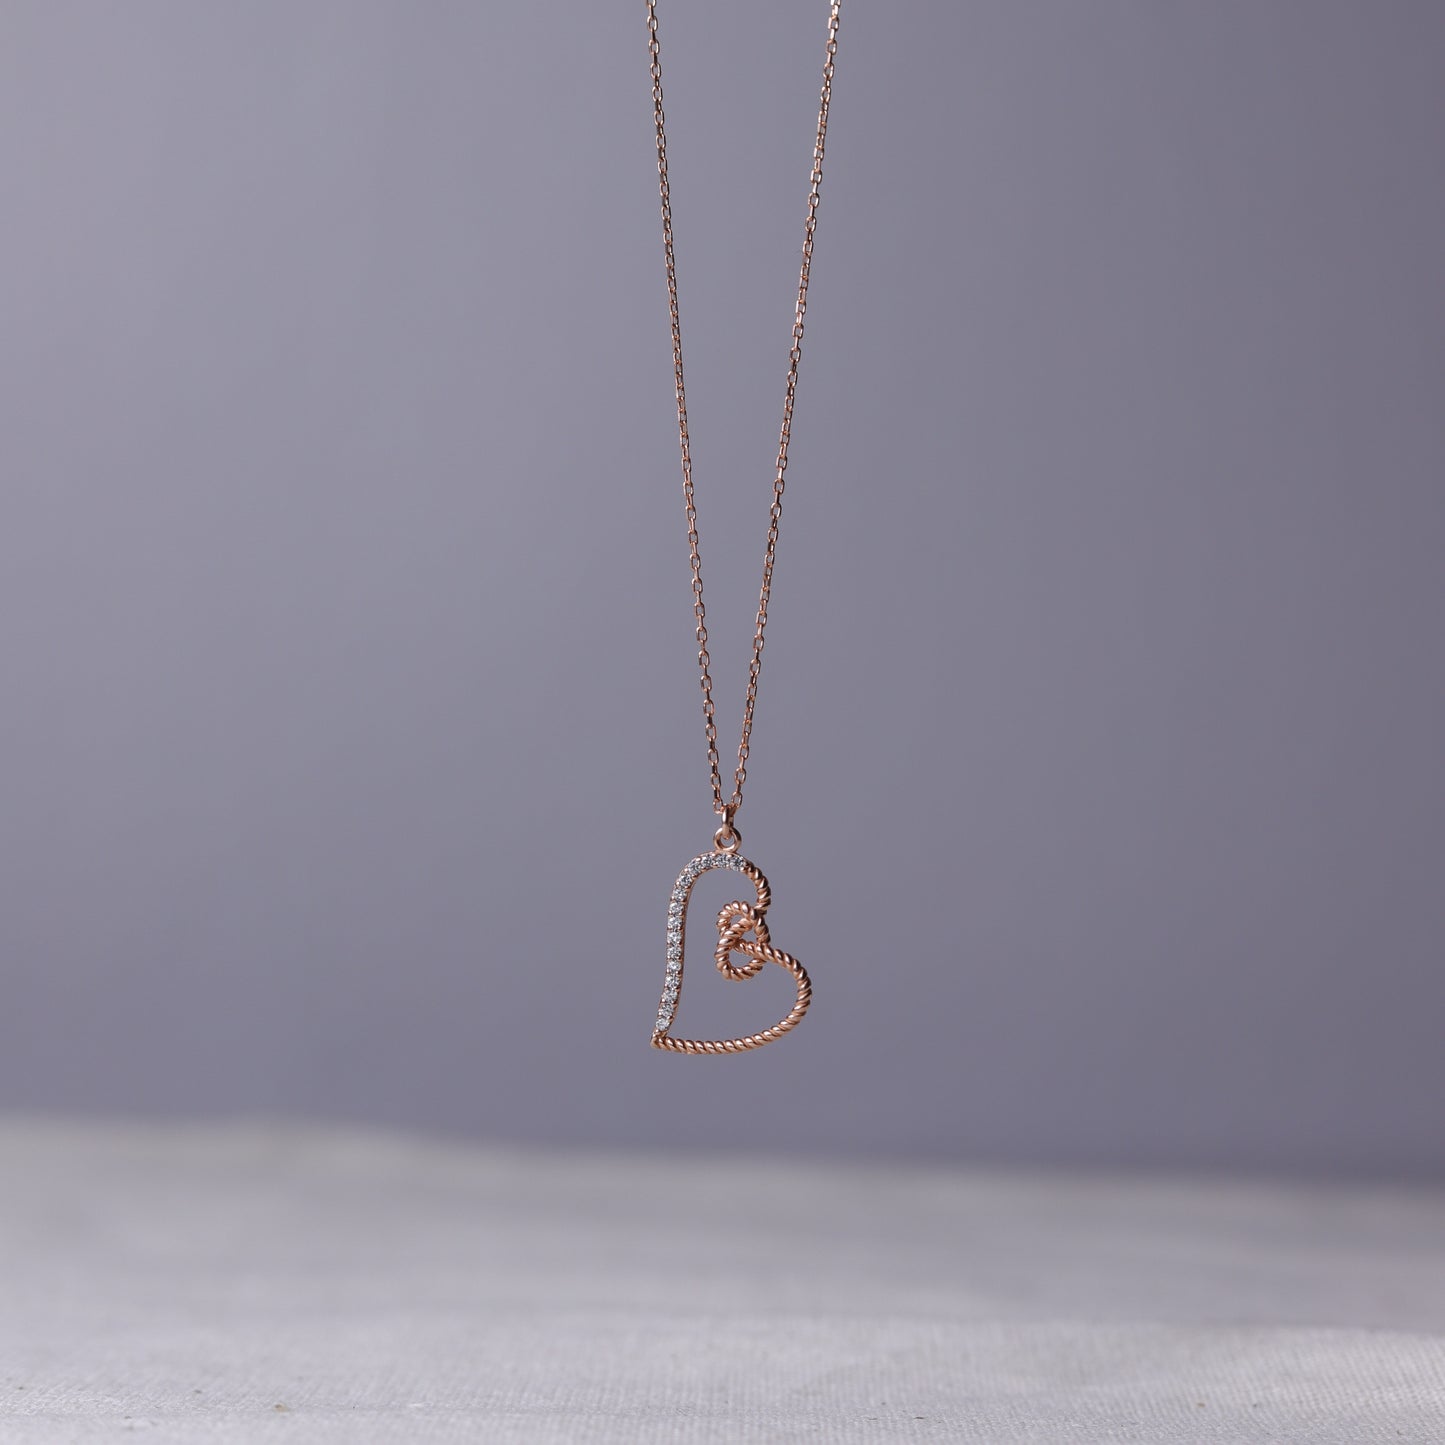 925 Sterling Silver Love Knot Heart Necklace